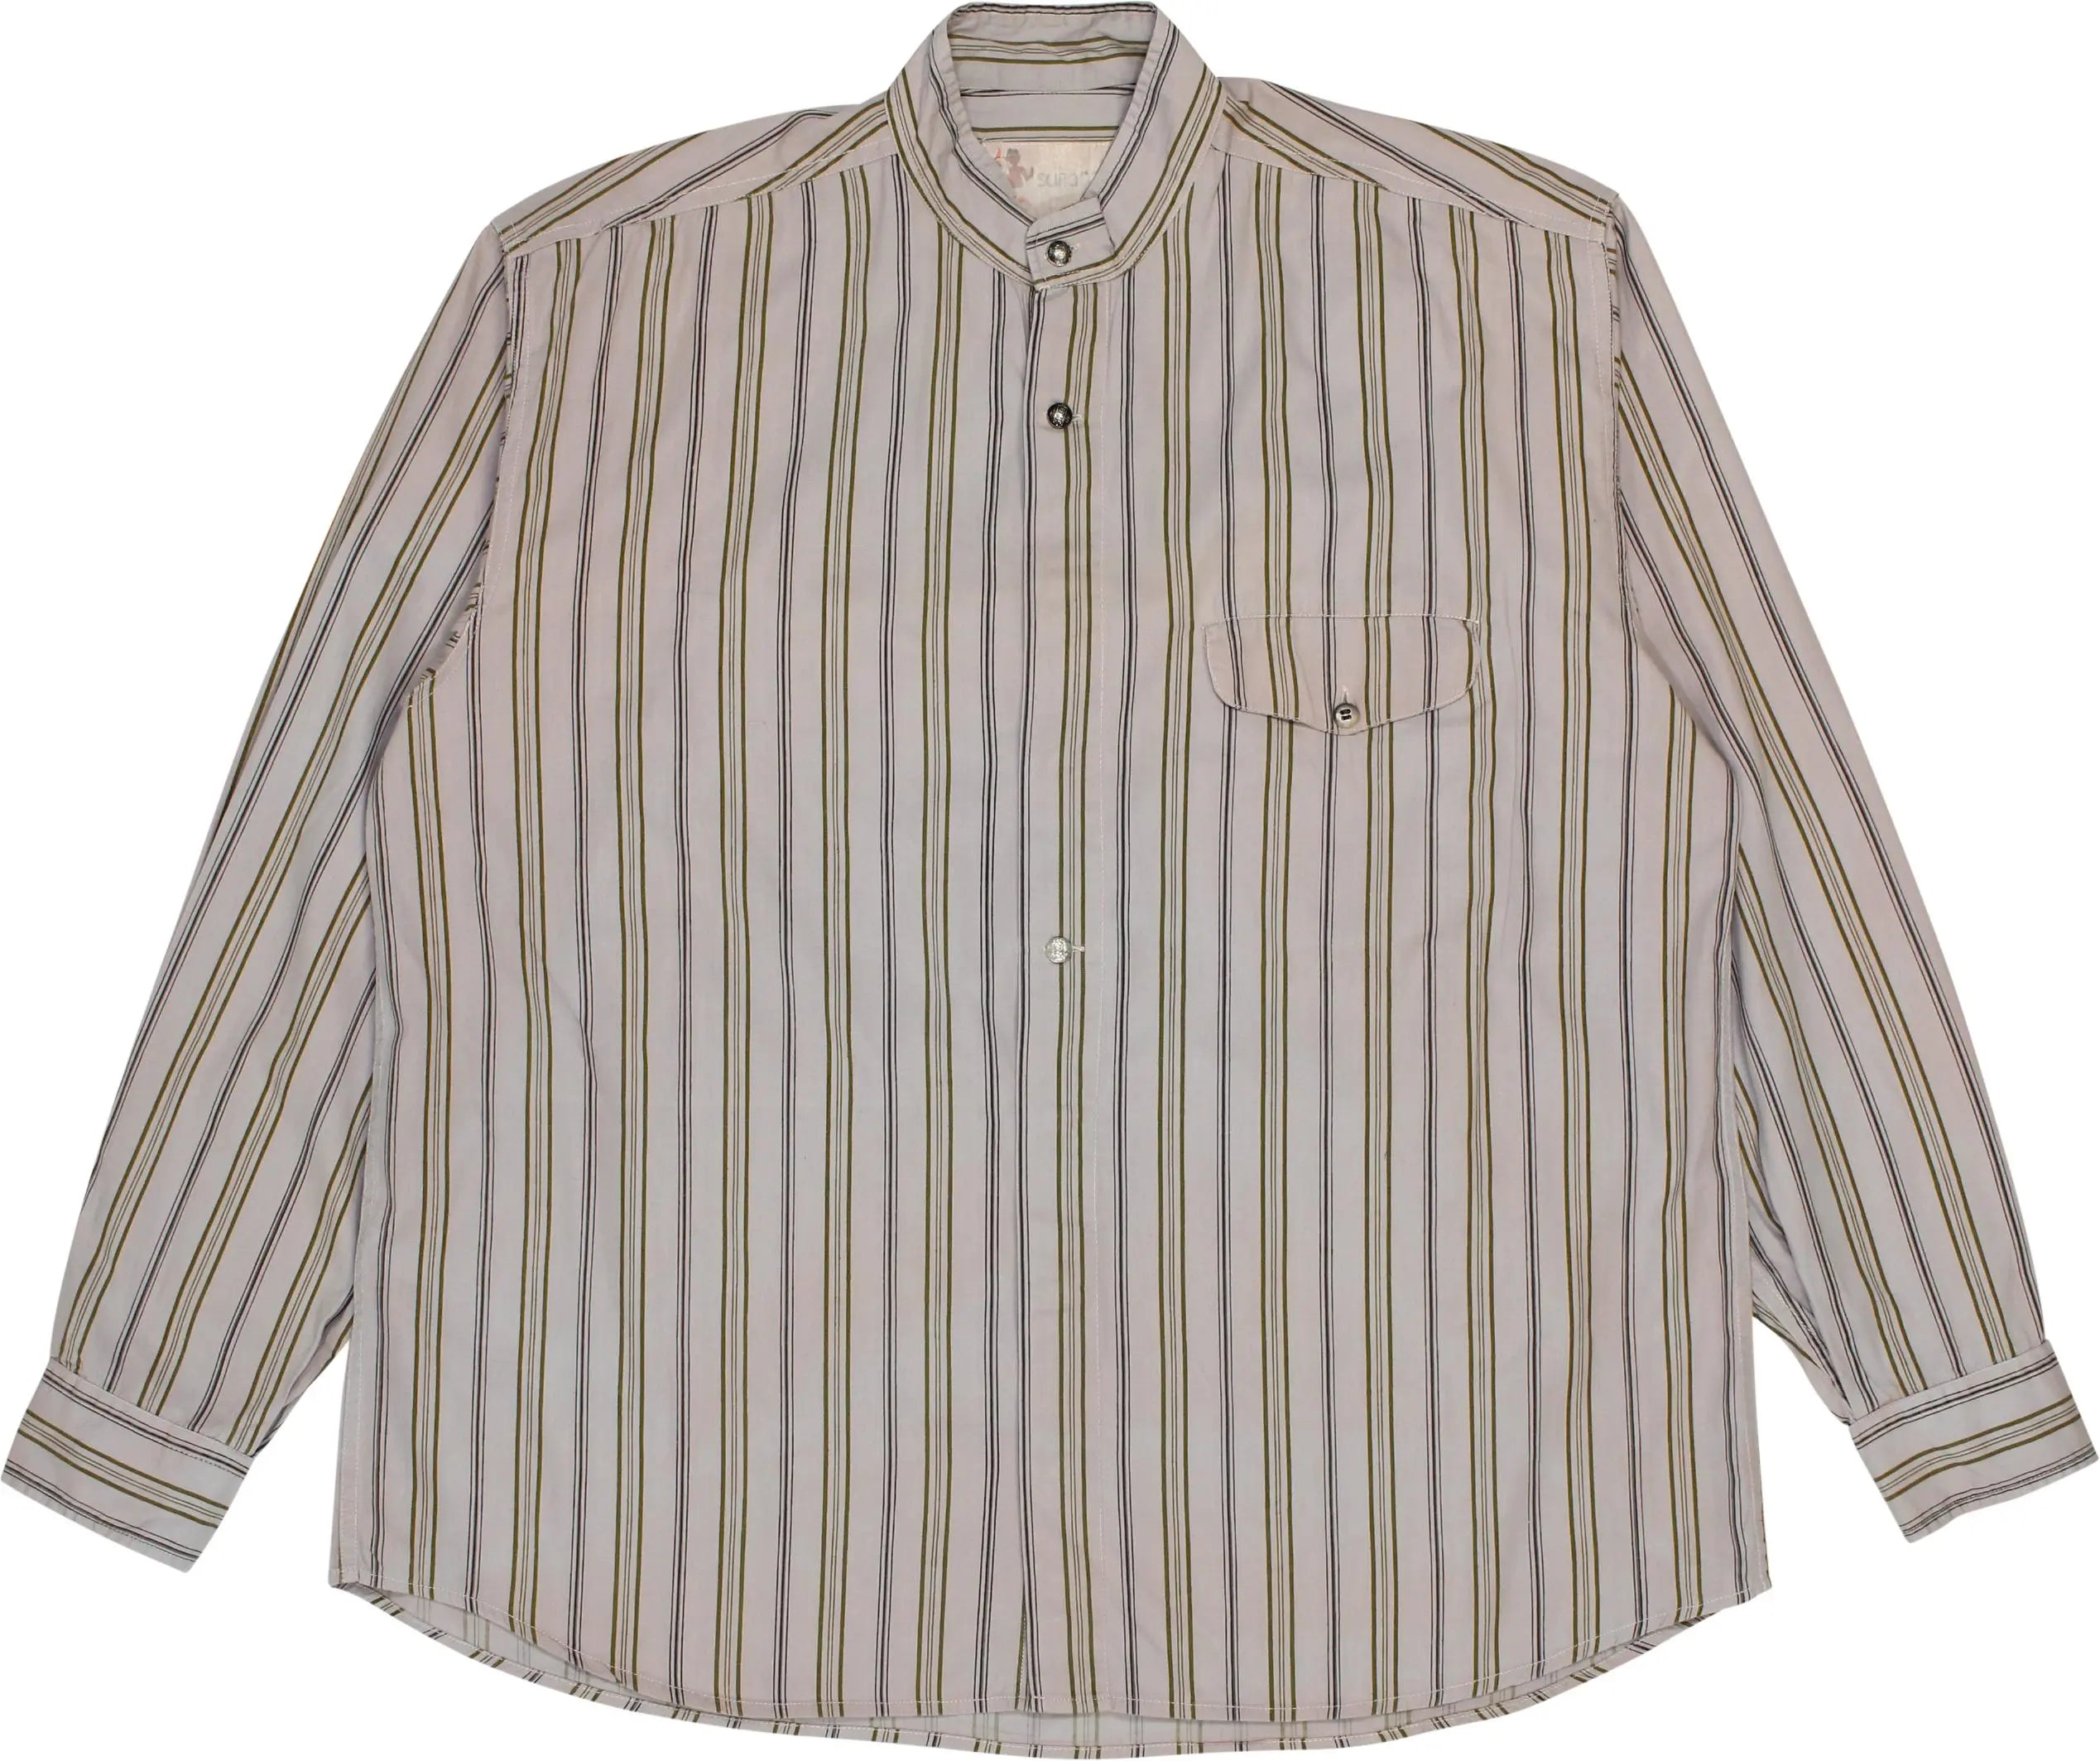 Unknown - Vintage Striped Shirt- ThriftTale.com - Vintage and second handclothing